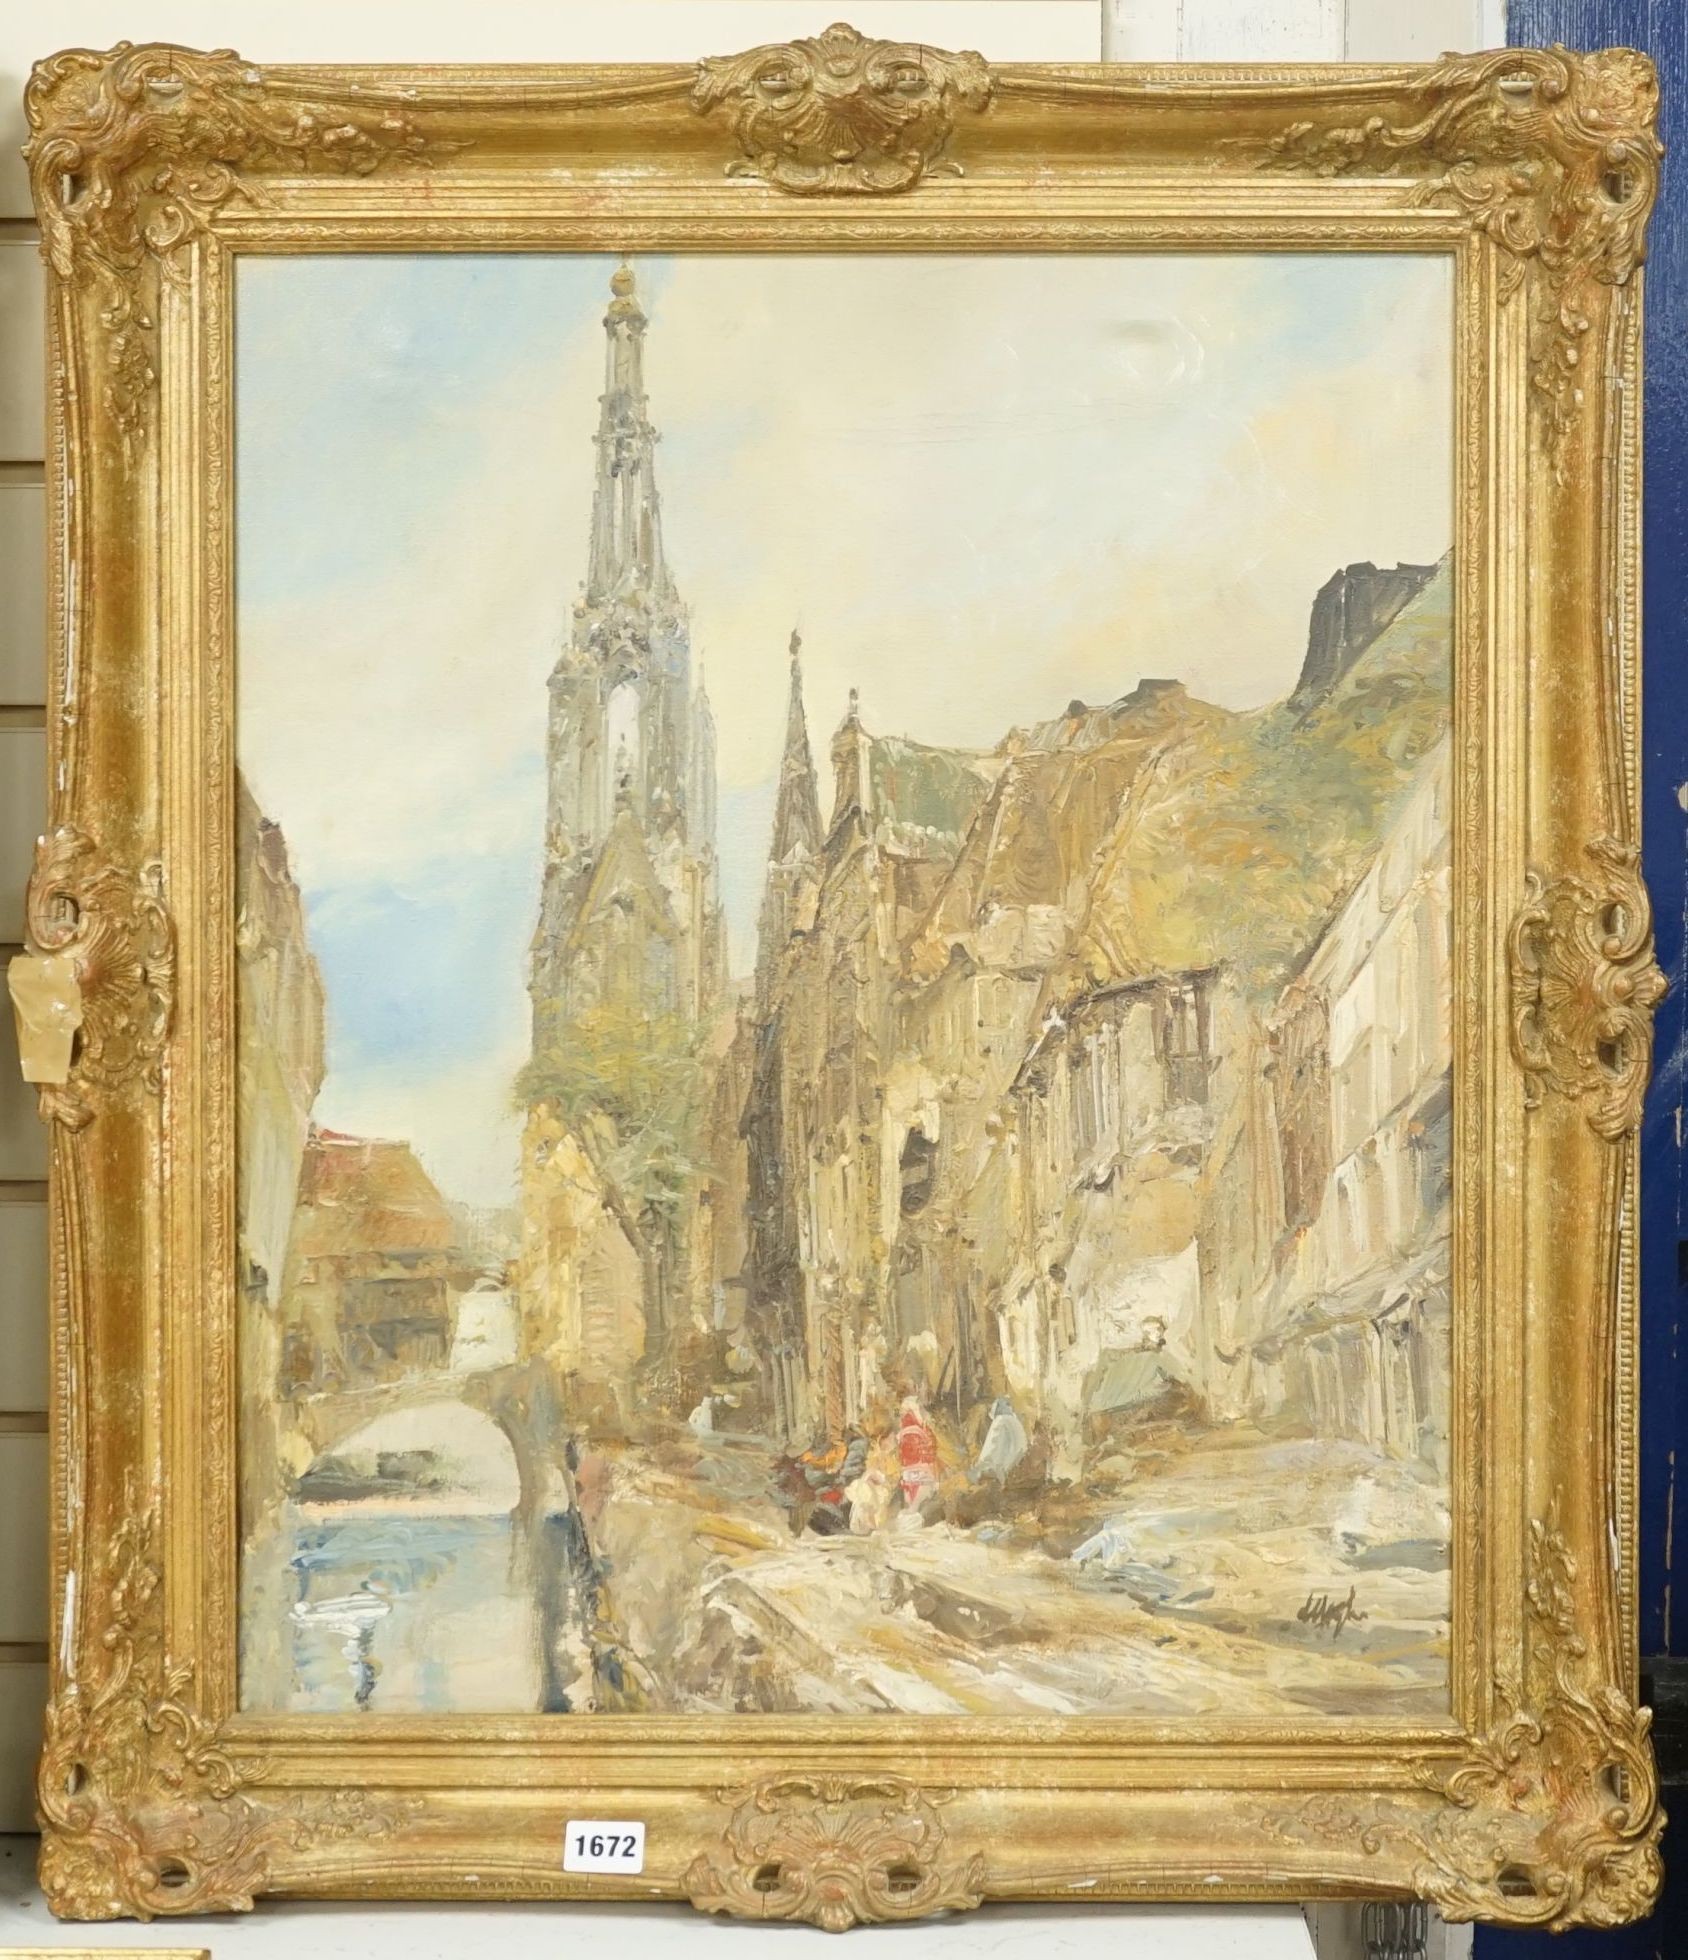 Flemish School, oil on canvas, Canal side church, indistinctly signed, 60 x 50cm